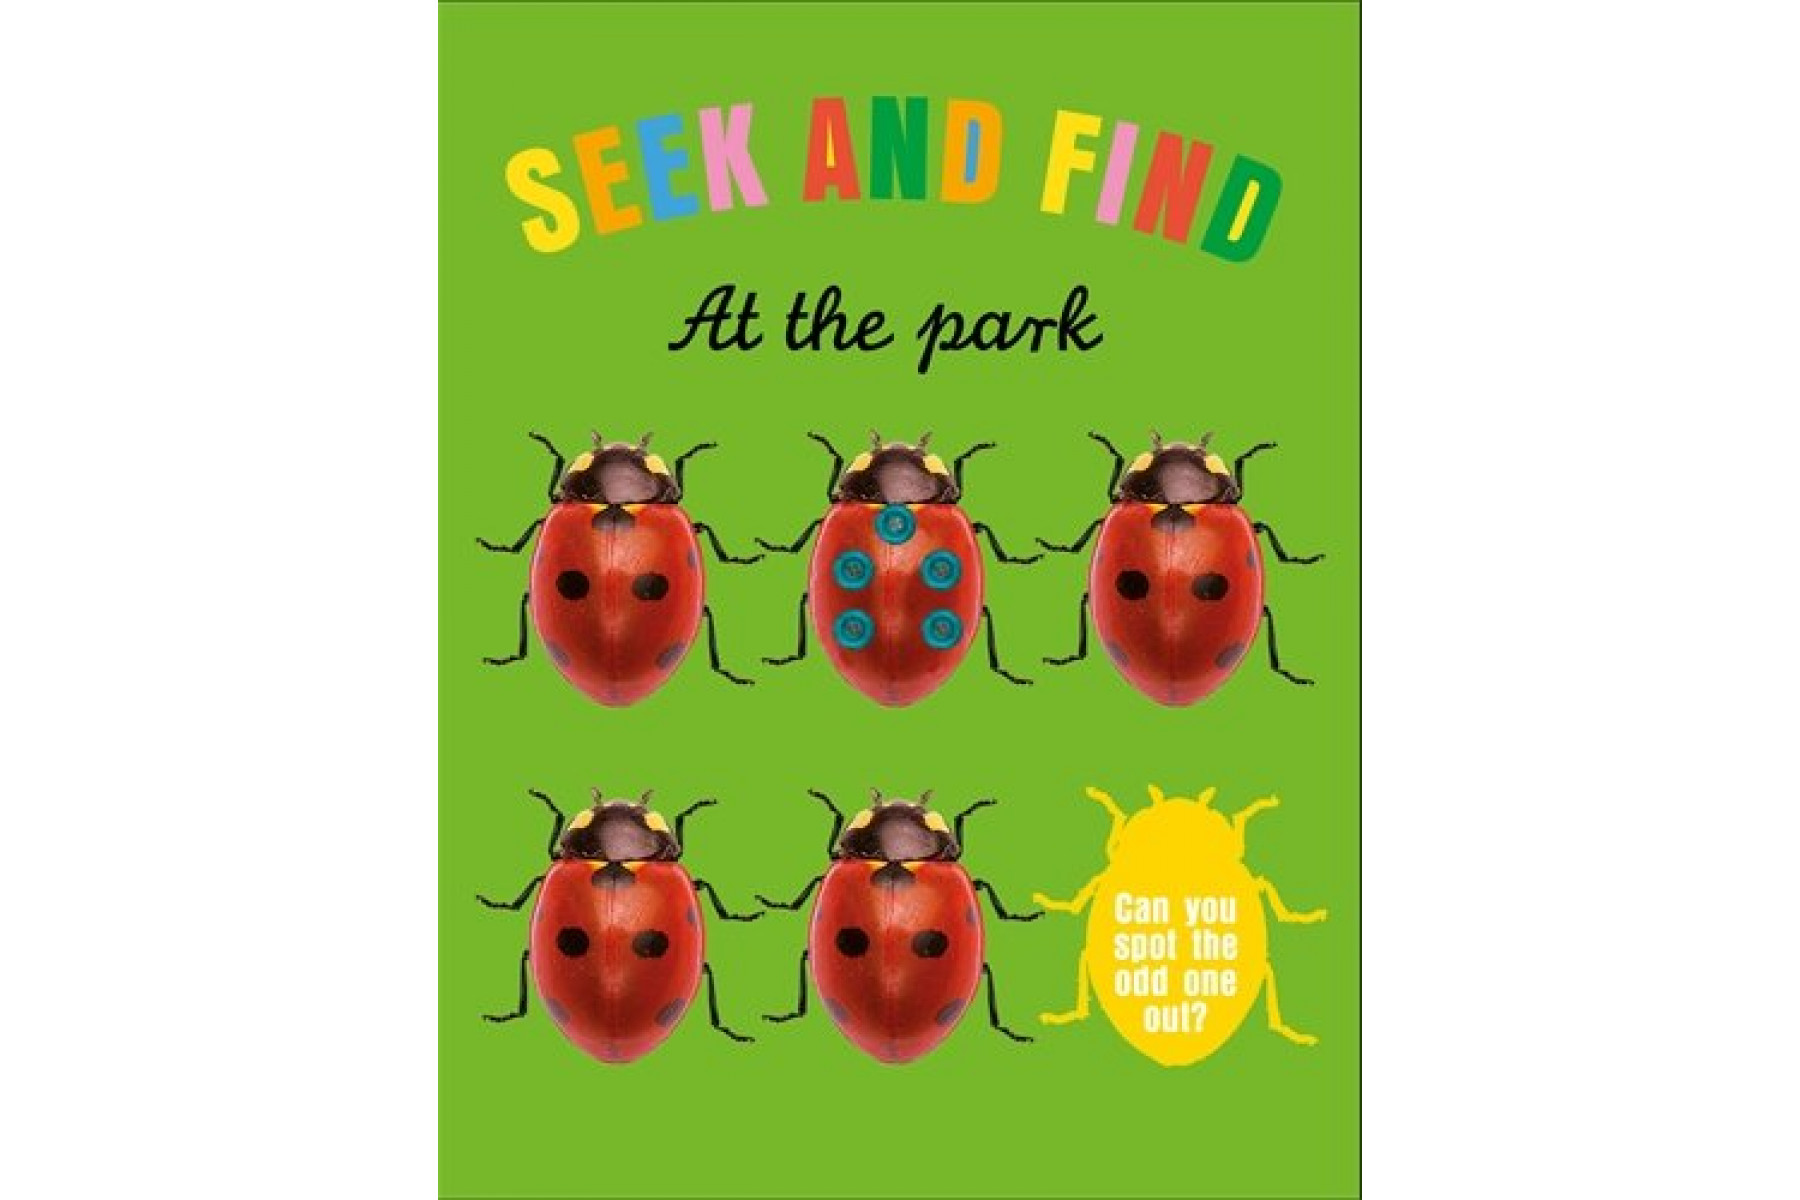 At the Park (Seek and Find)